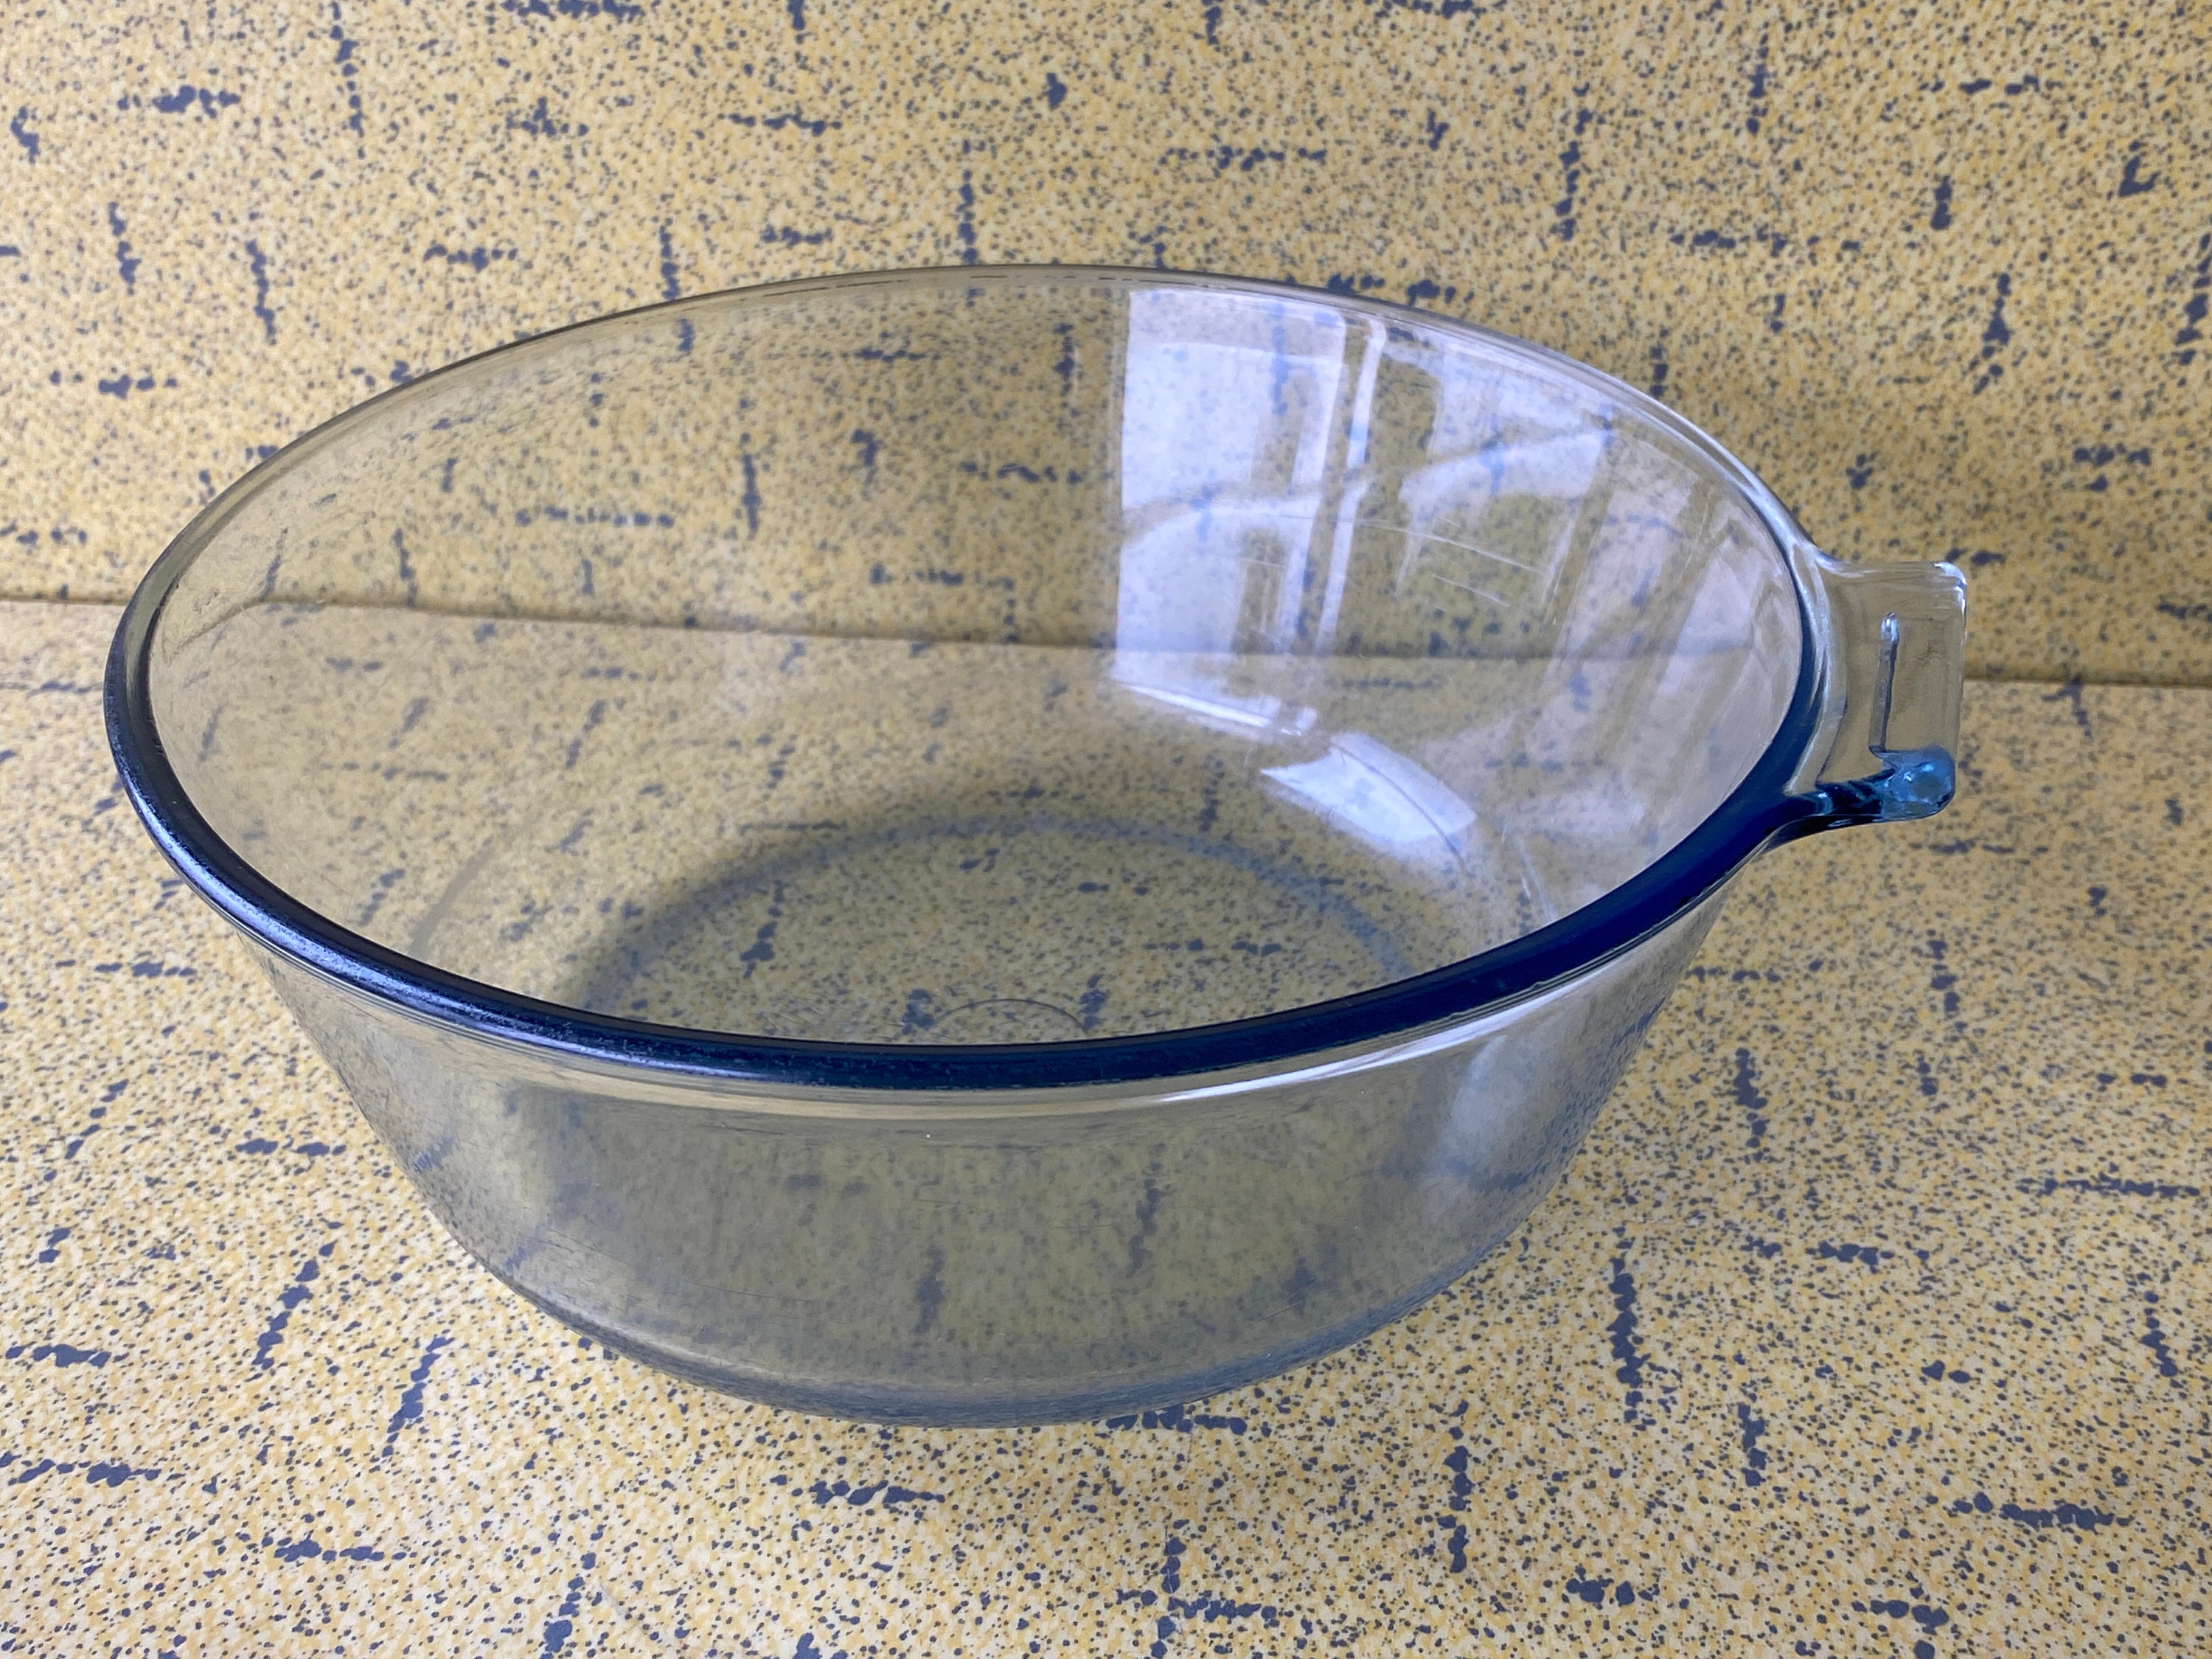 Vintage Pyrex Flameware Double Boiler Bain Marie Blue Tint Glass Handles  Stainless Steel Flame Made in USA 1.5 Quart 